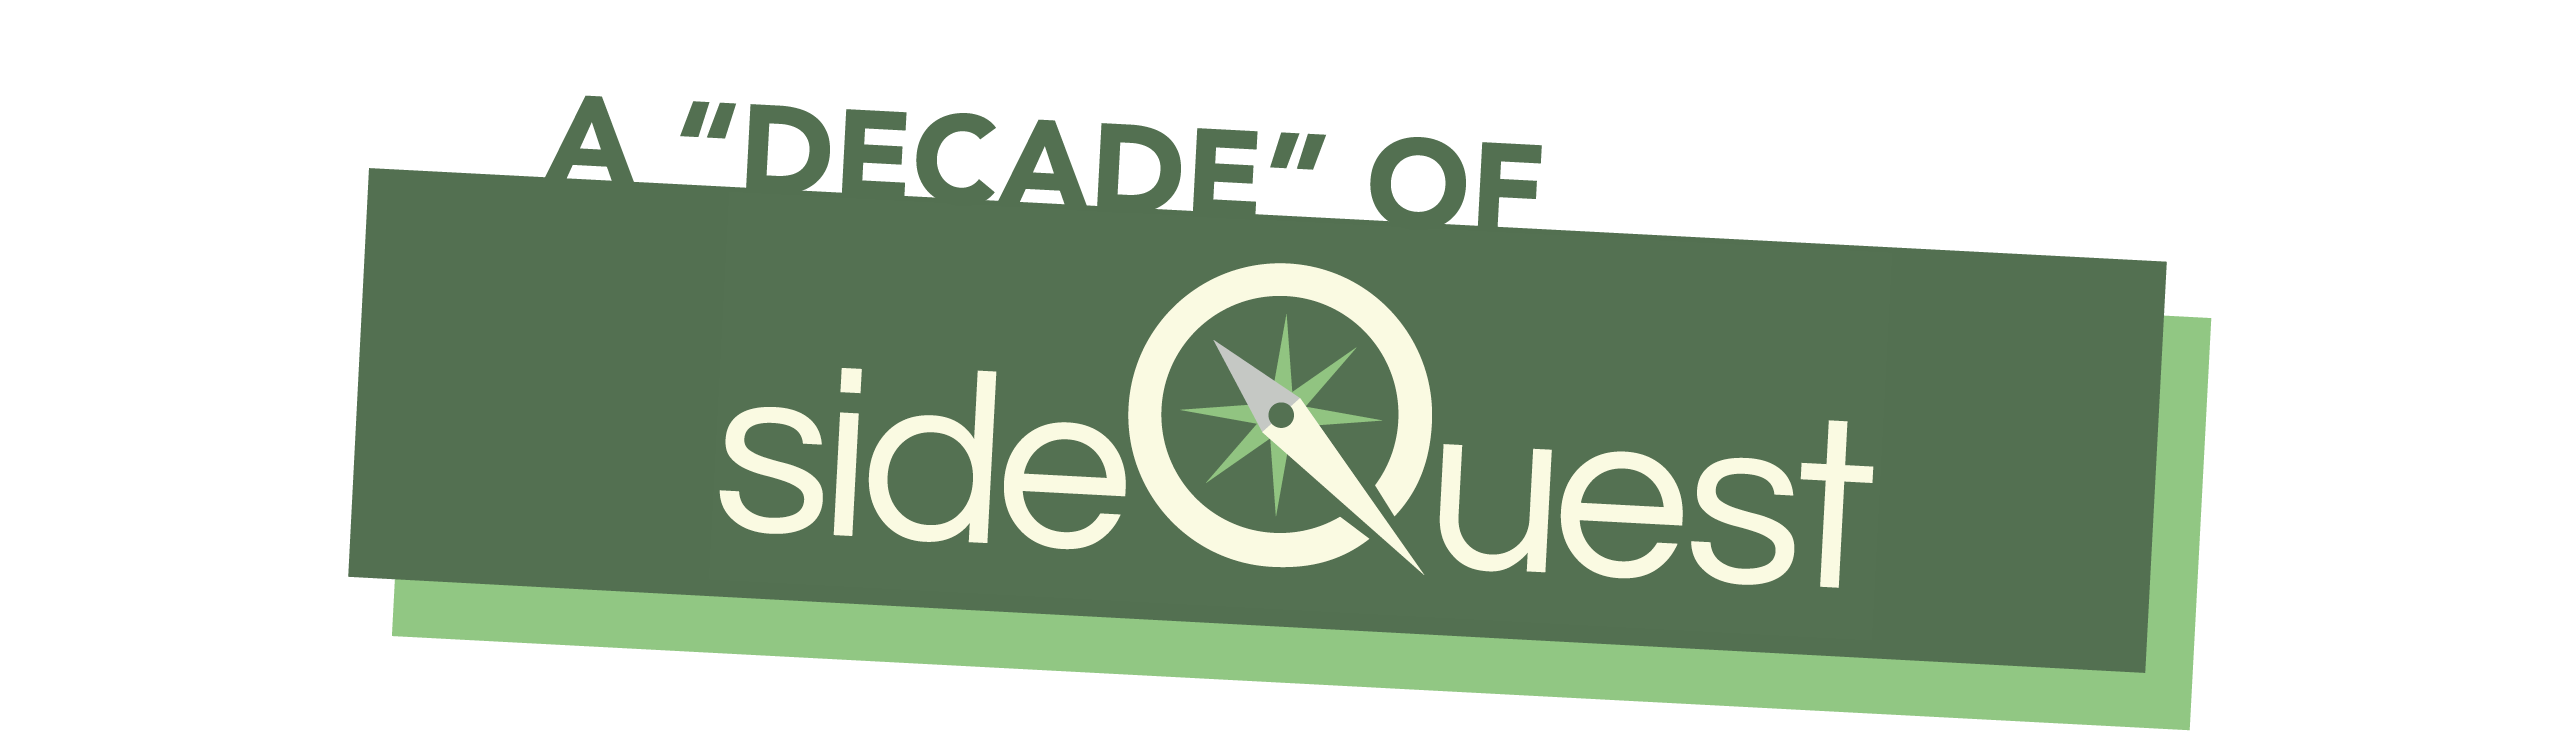 A "Decade" of Sidequest